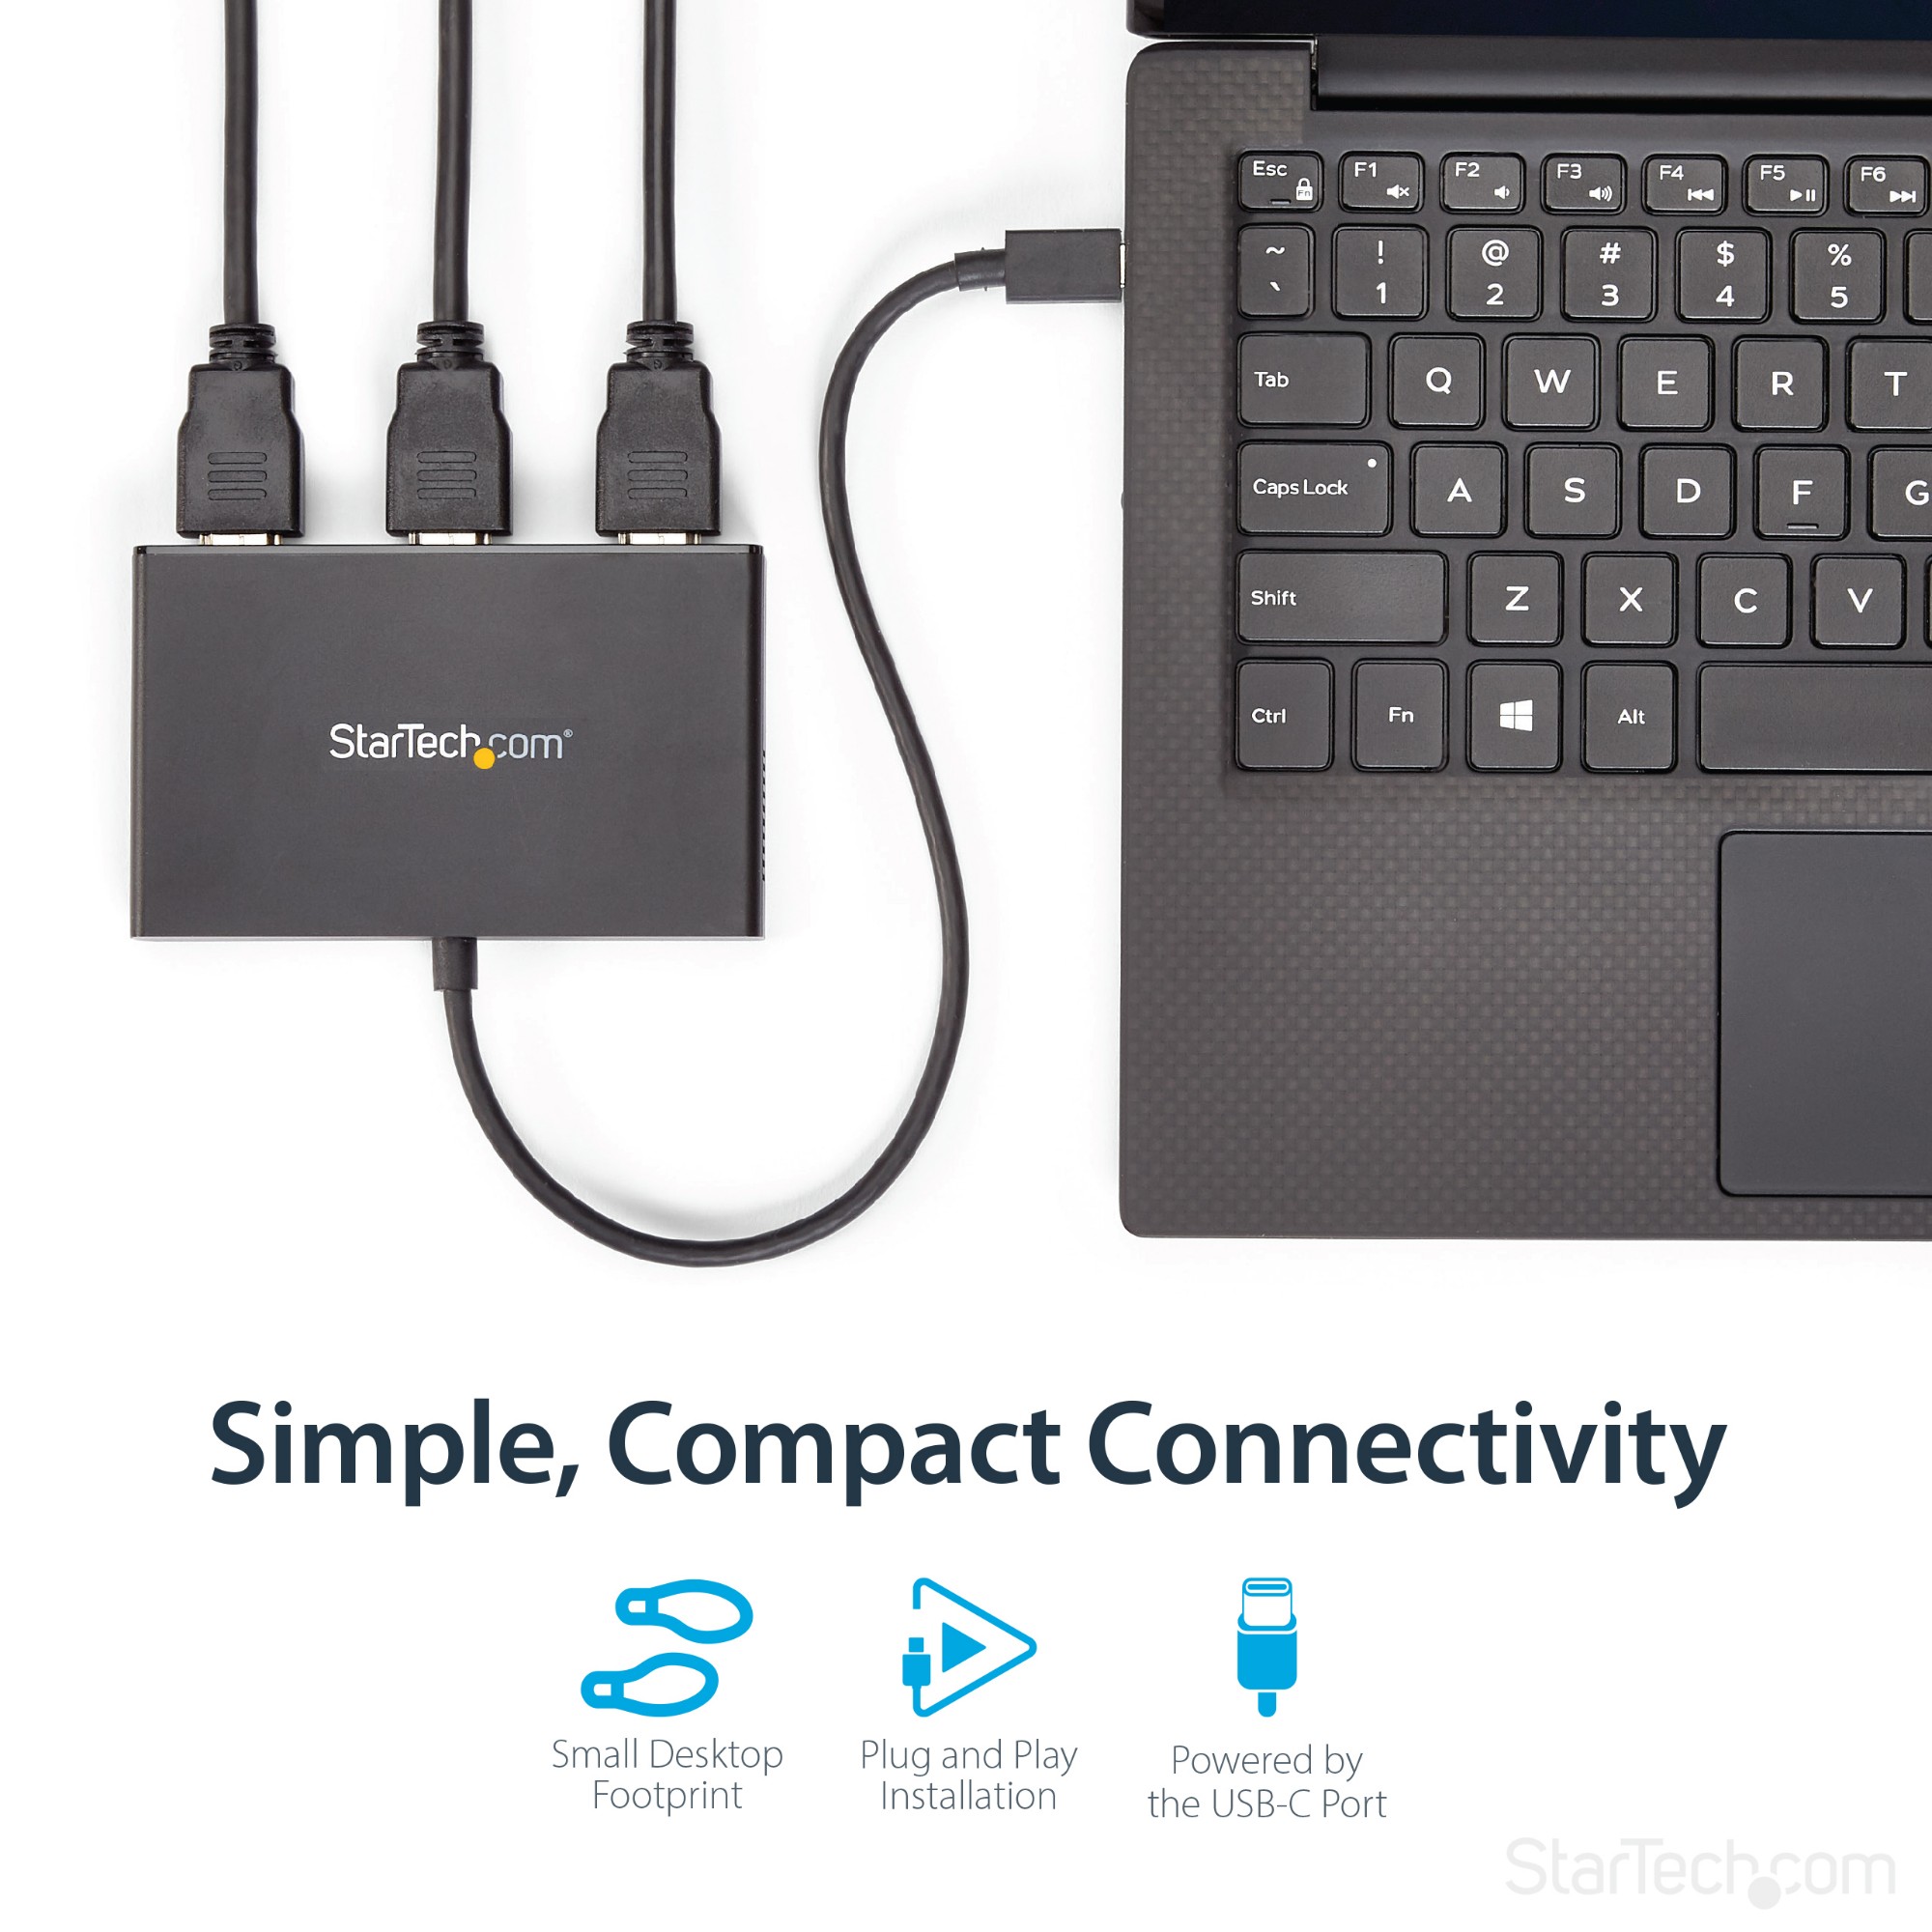 StarTech.com 3-Port Multi Monitor Adapter - USB-C to 3x HDMI Video Splitter - USB Type-C to HDMI MST Hub - Dual 4K 30Hz or Triple 1080p - Thunderbolt 3 Compatible - Windows Only